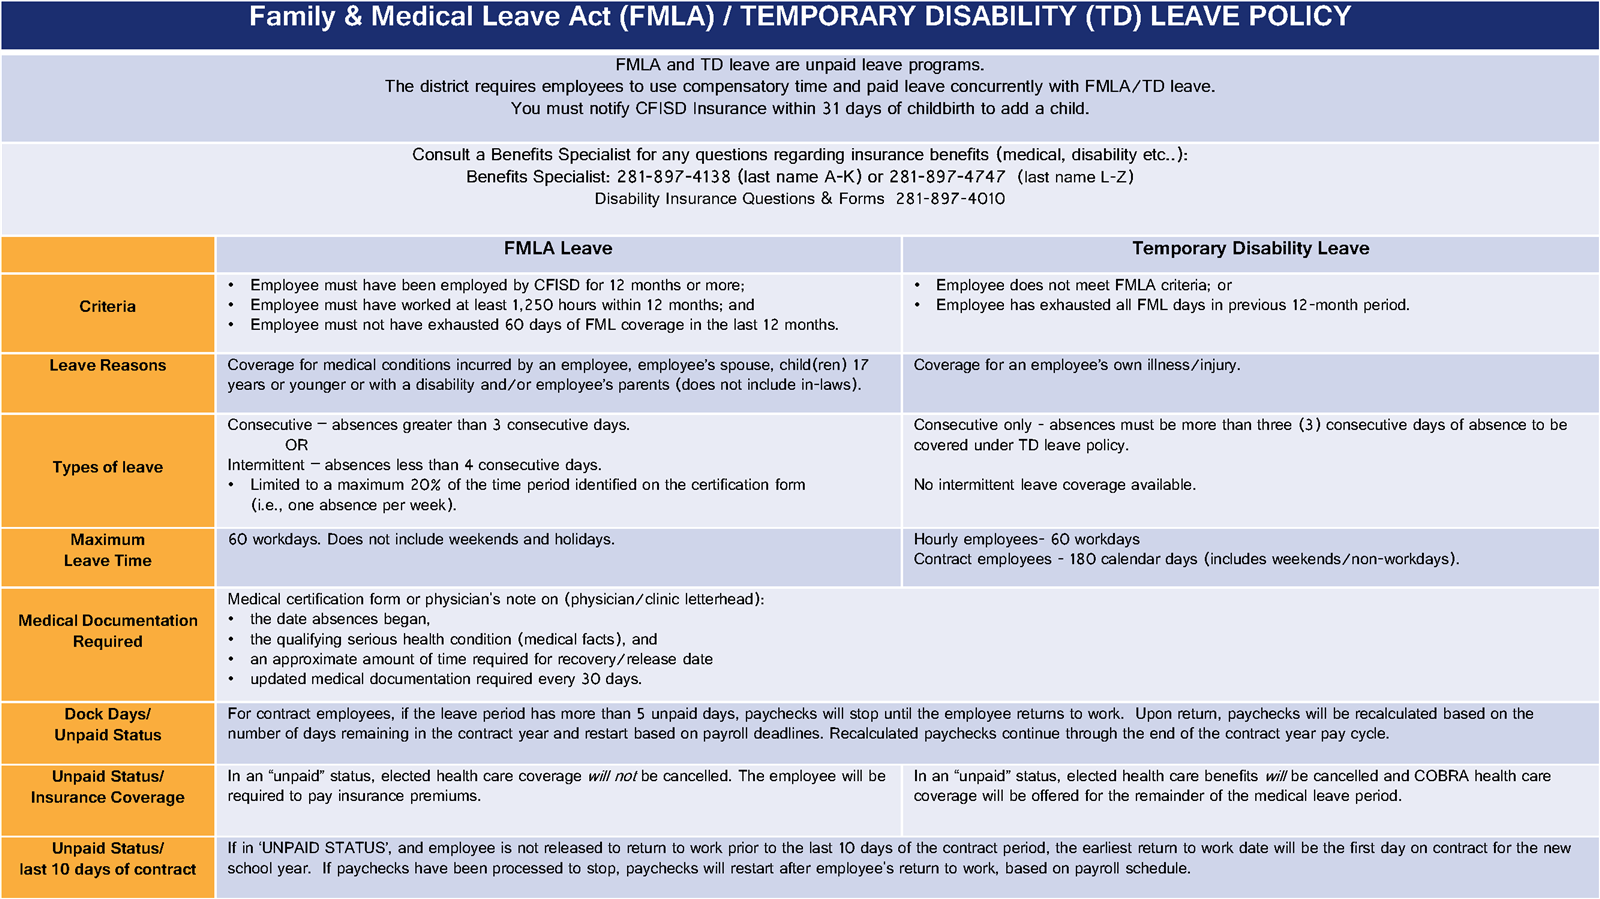 FMLA and Temporary Disability Leave Policy